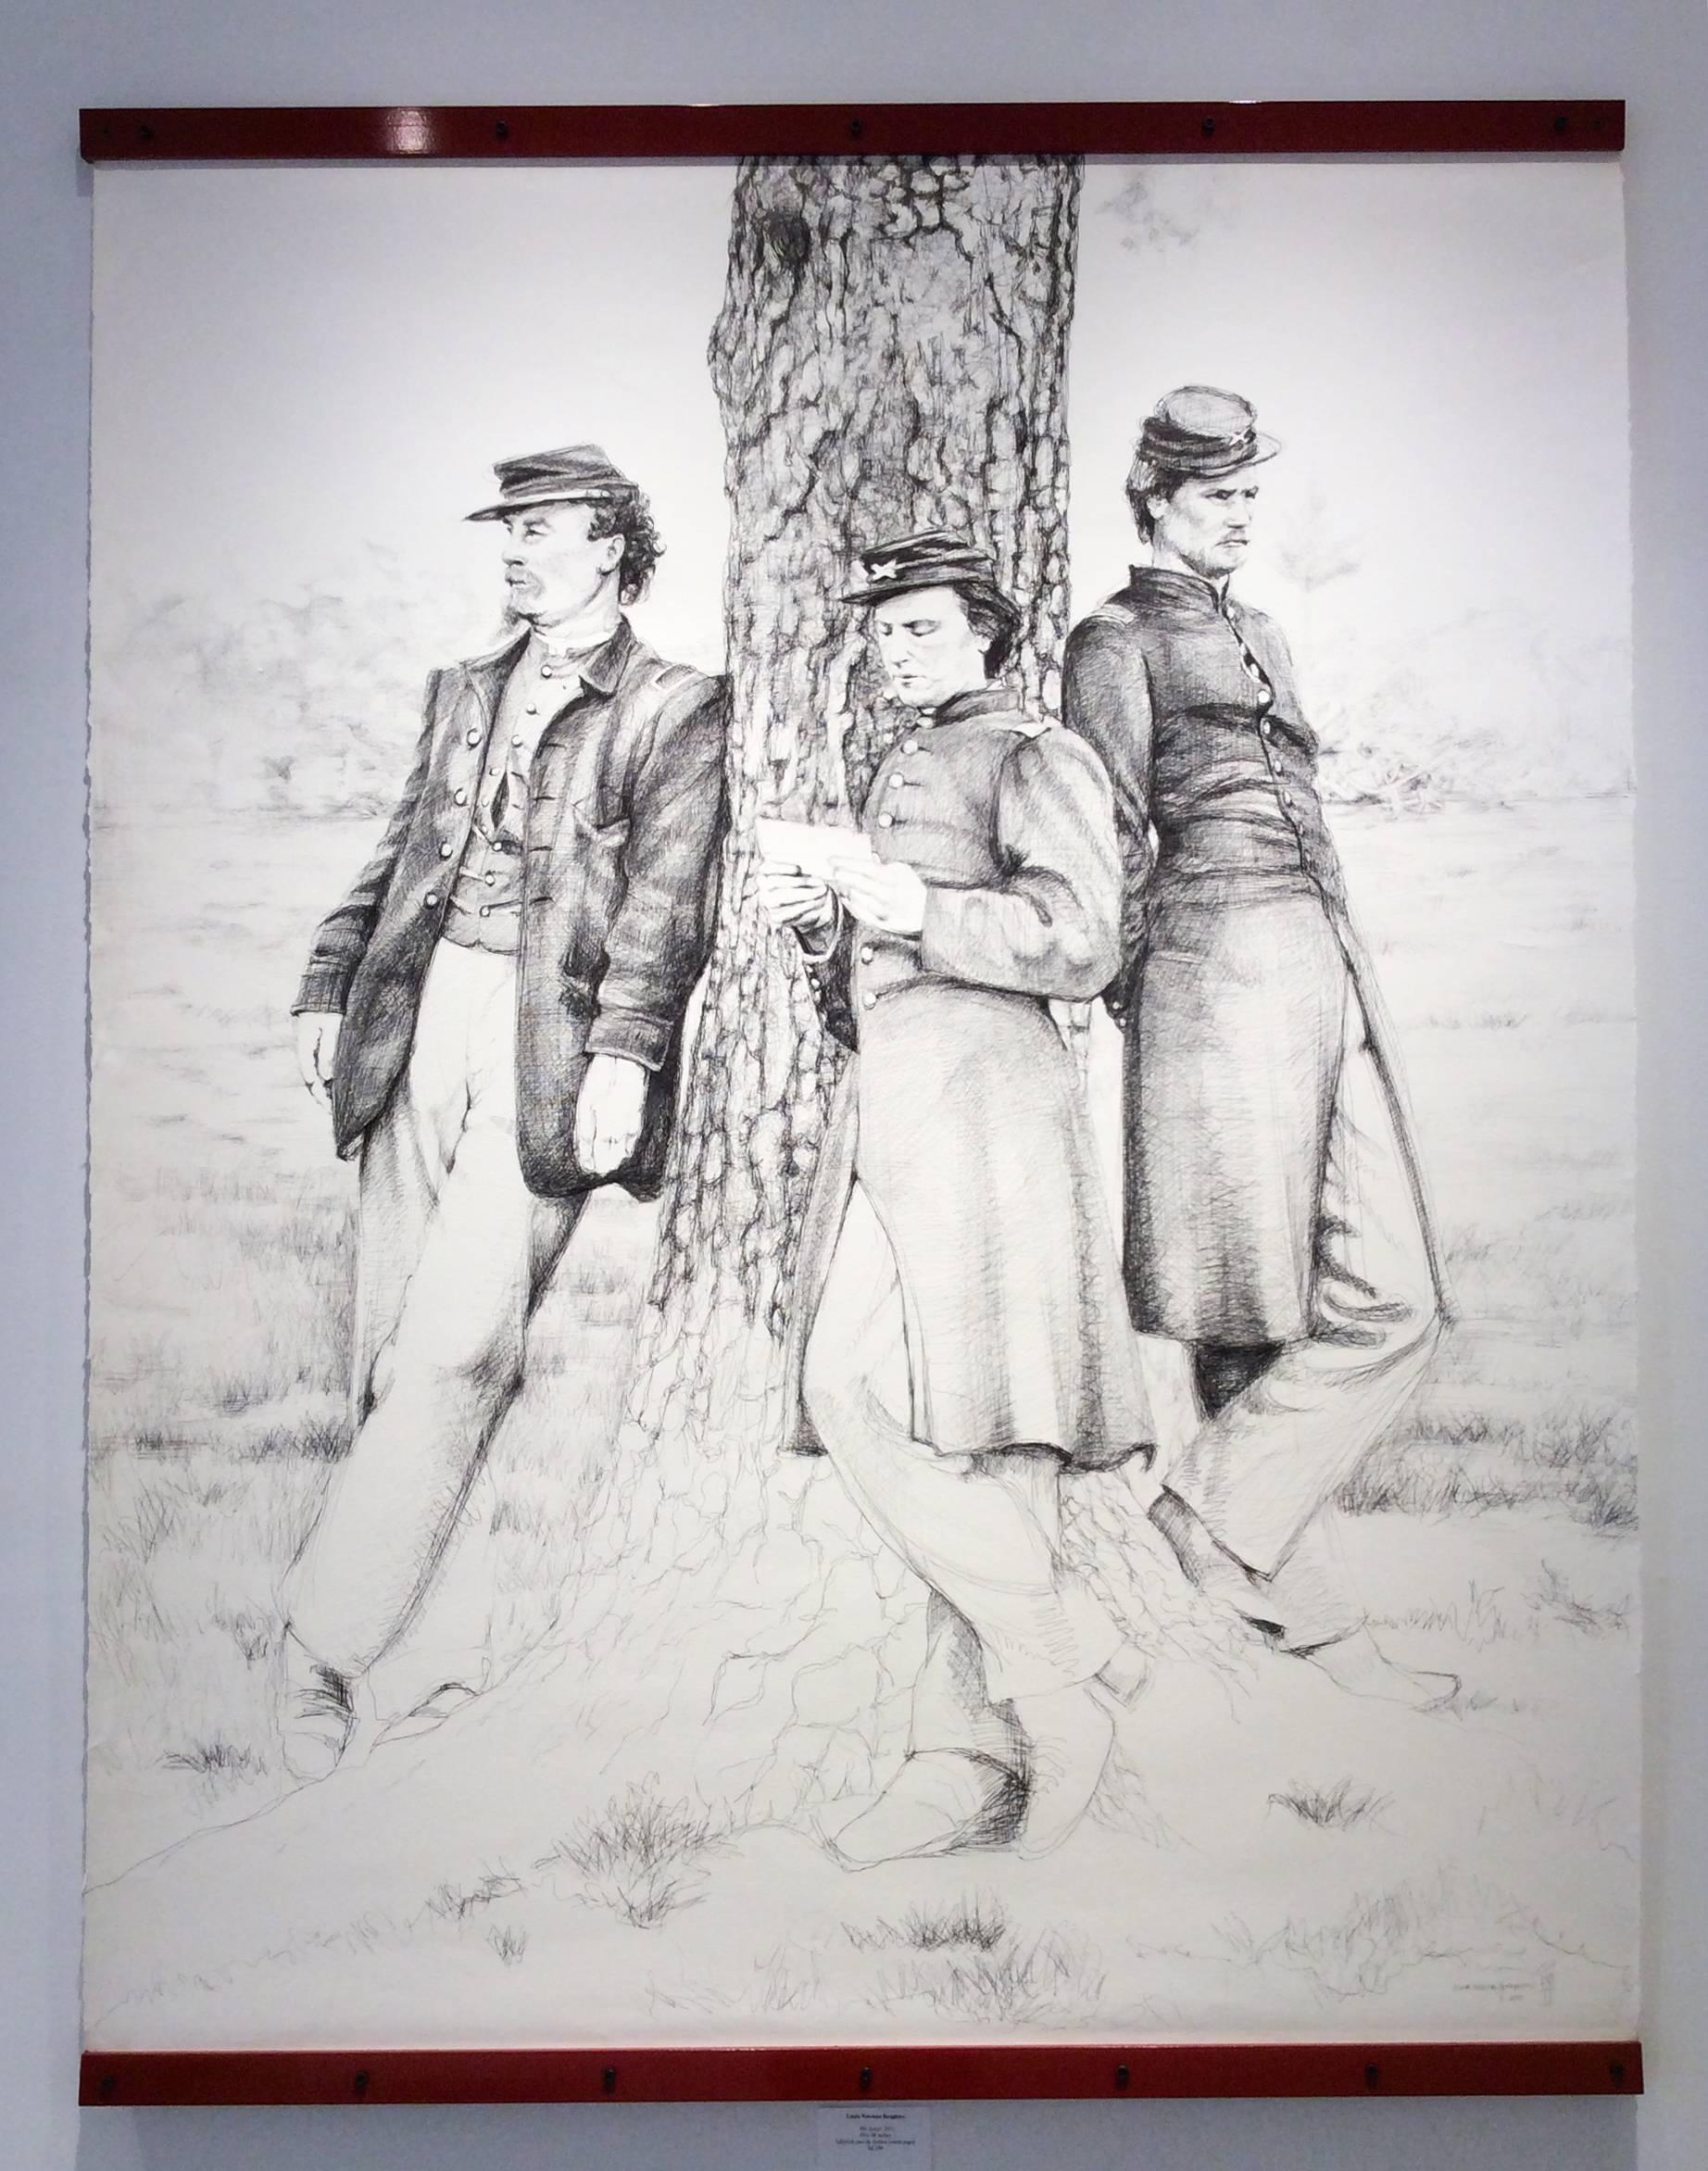 The Letter (Large Black & White Ballpoint Pen Drawing of Civil War Soldiers) - Art by Linda Newman Boughton